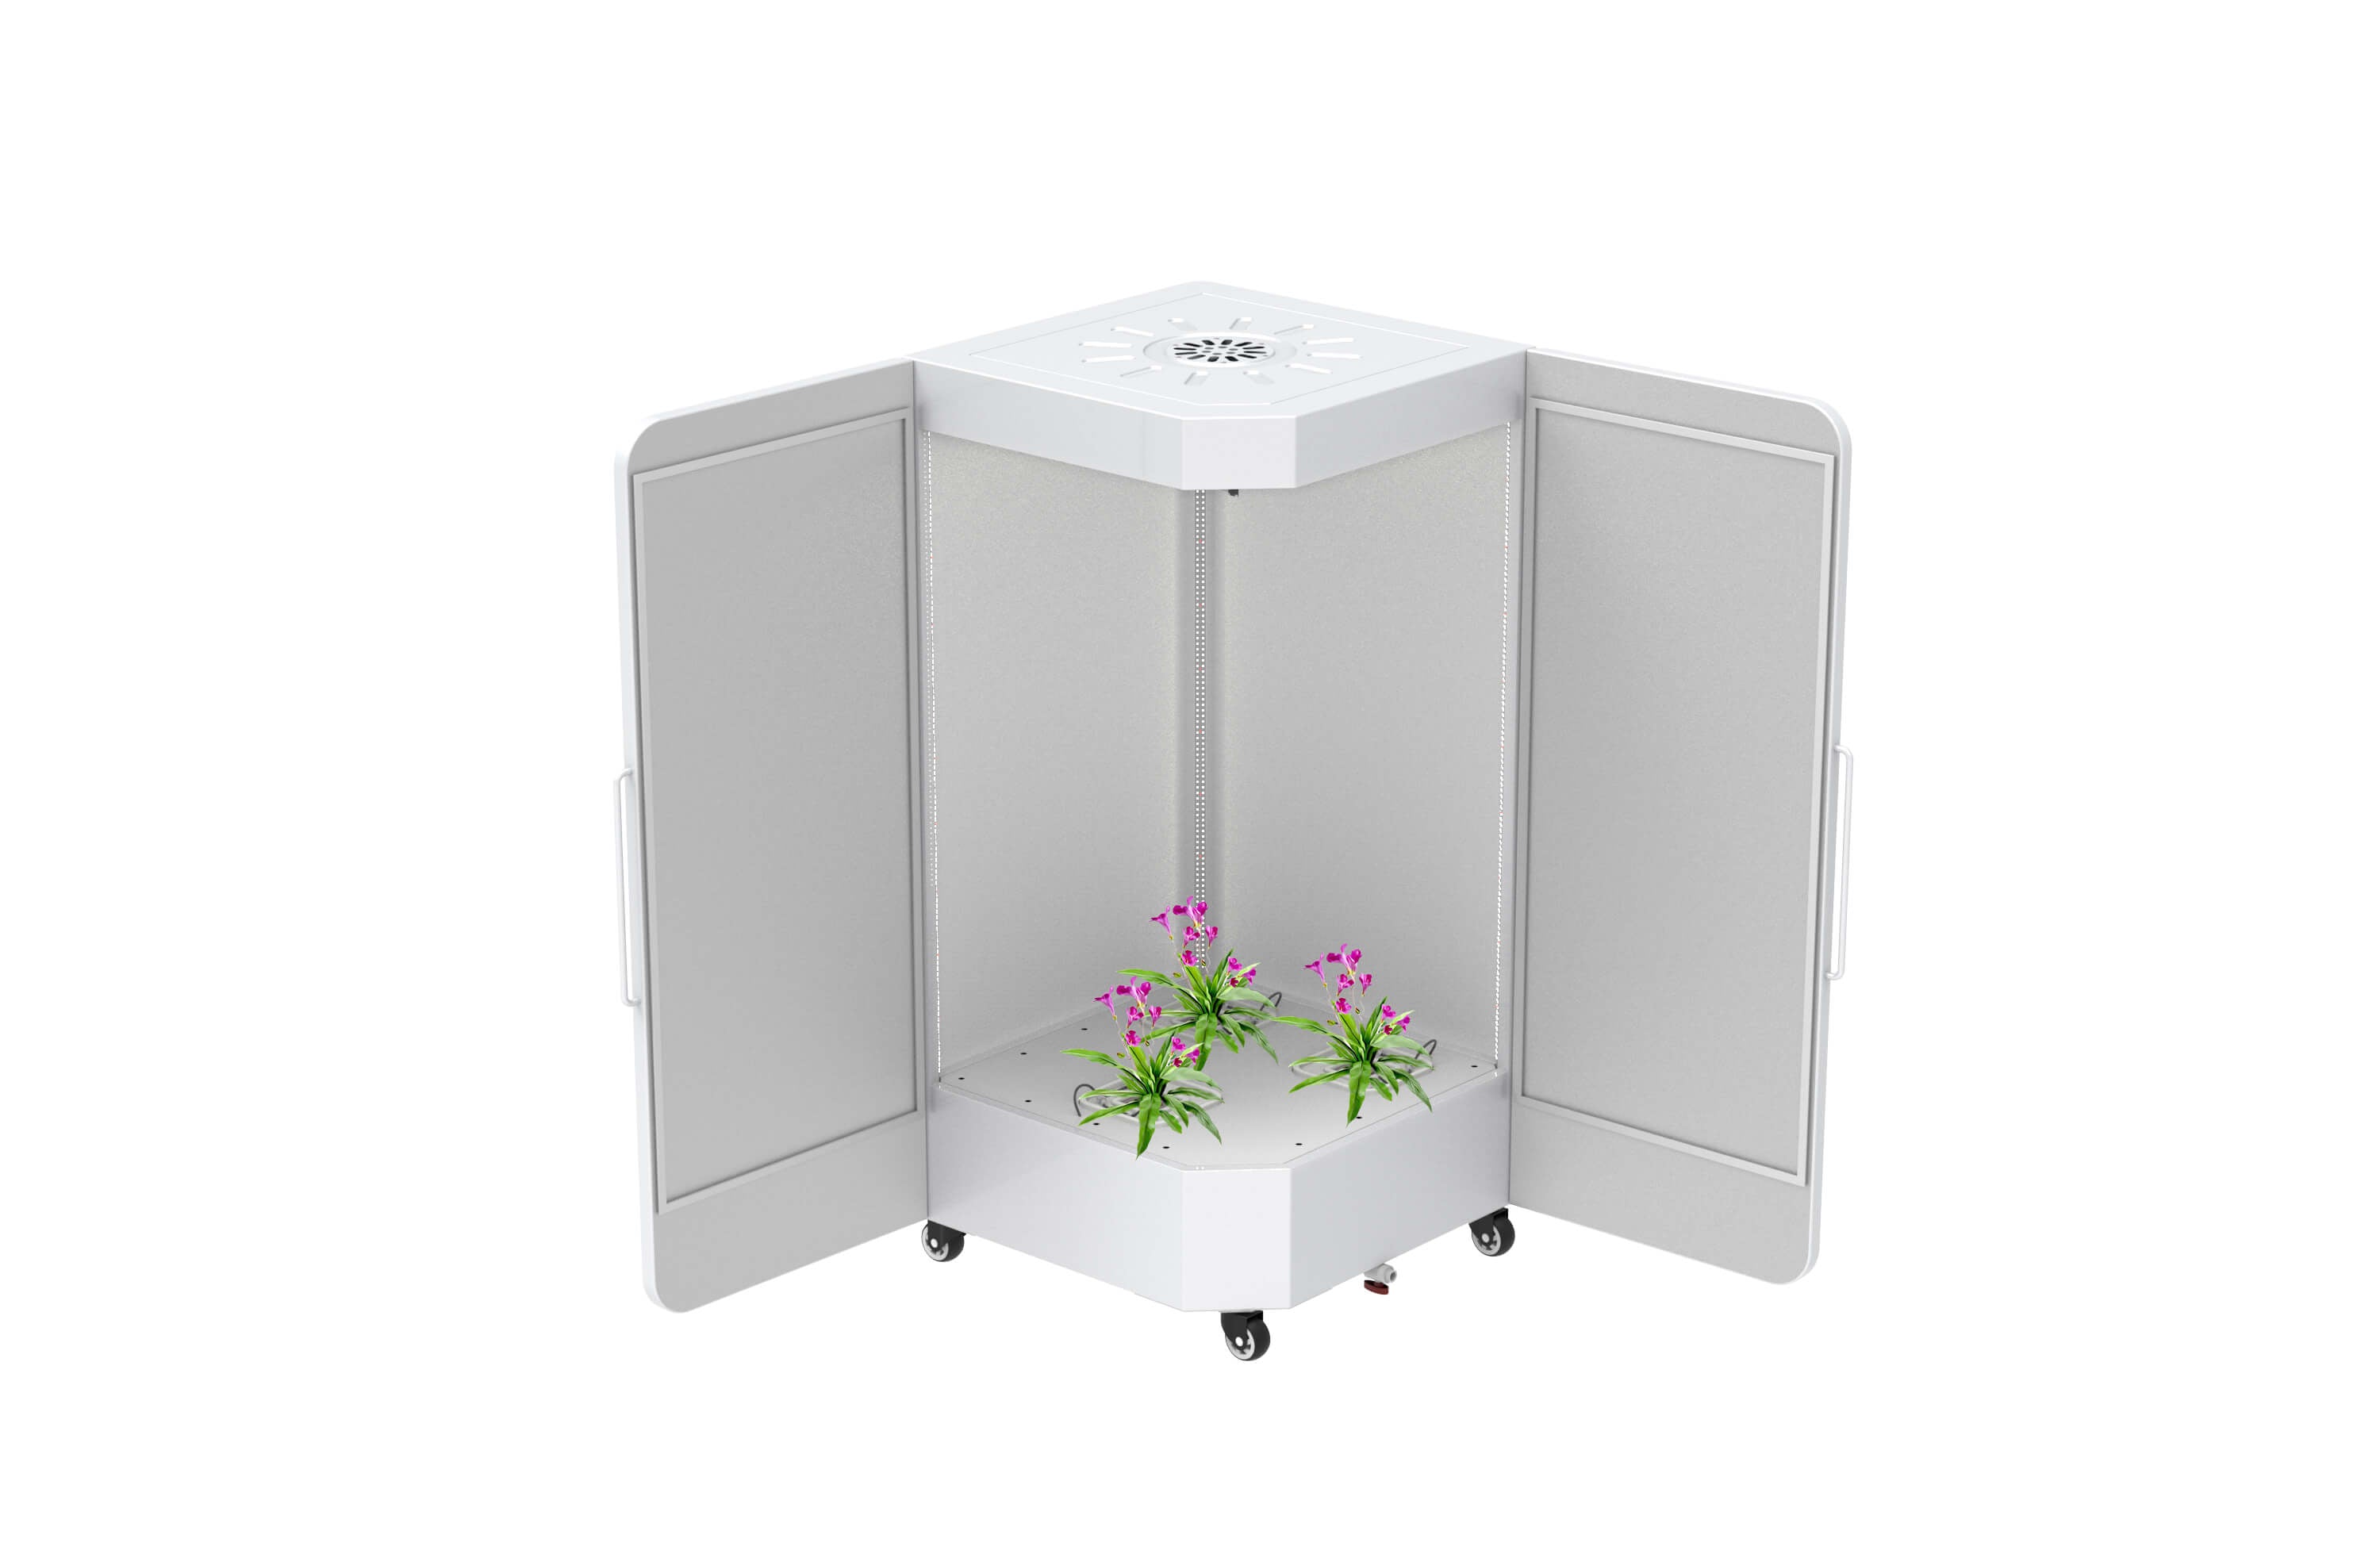 CultivaCube All in One Grow Box - 3 Plants, Fully Auto Control